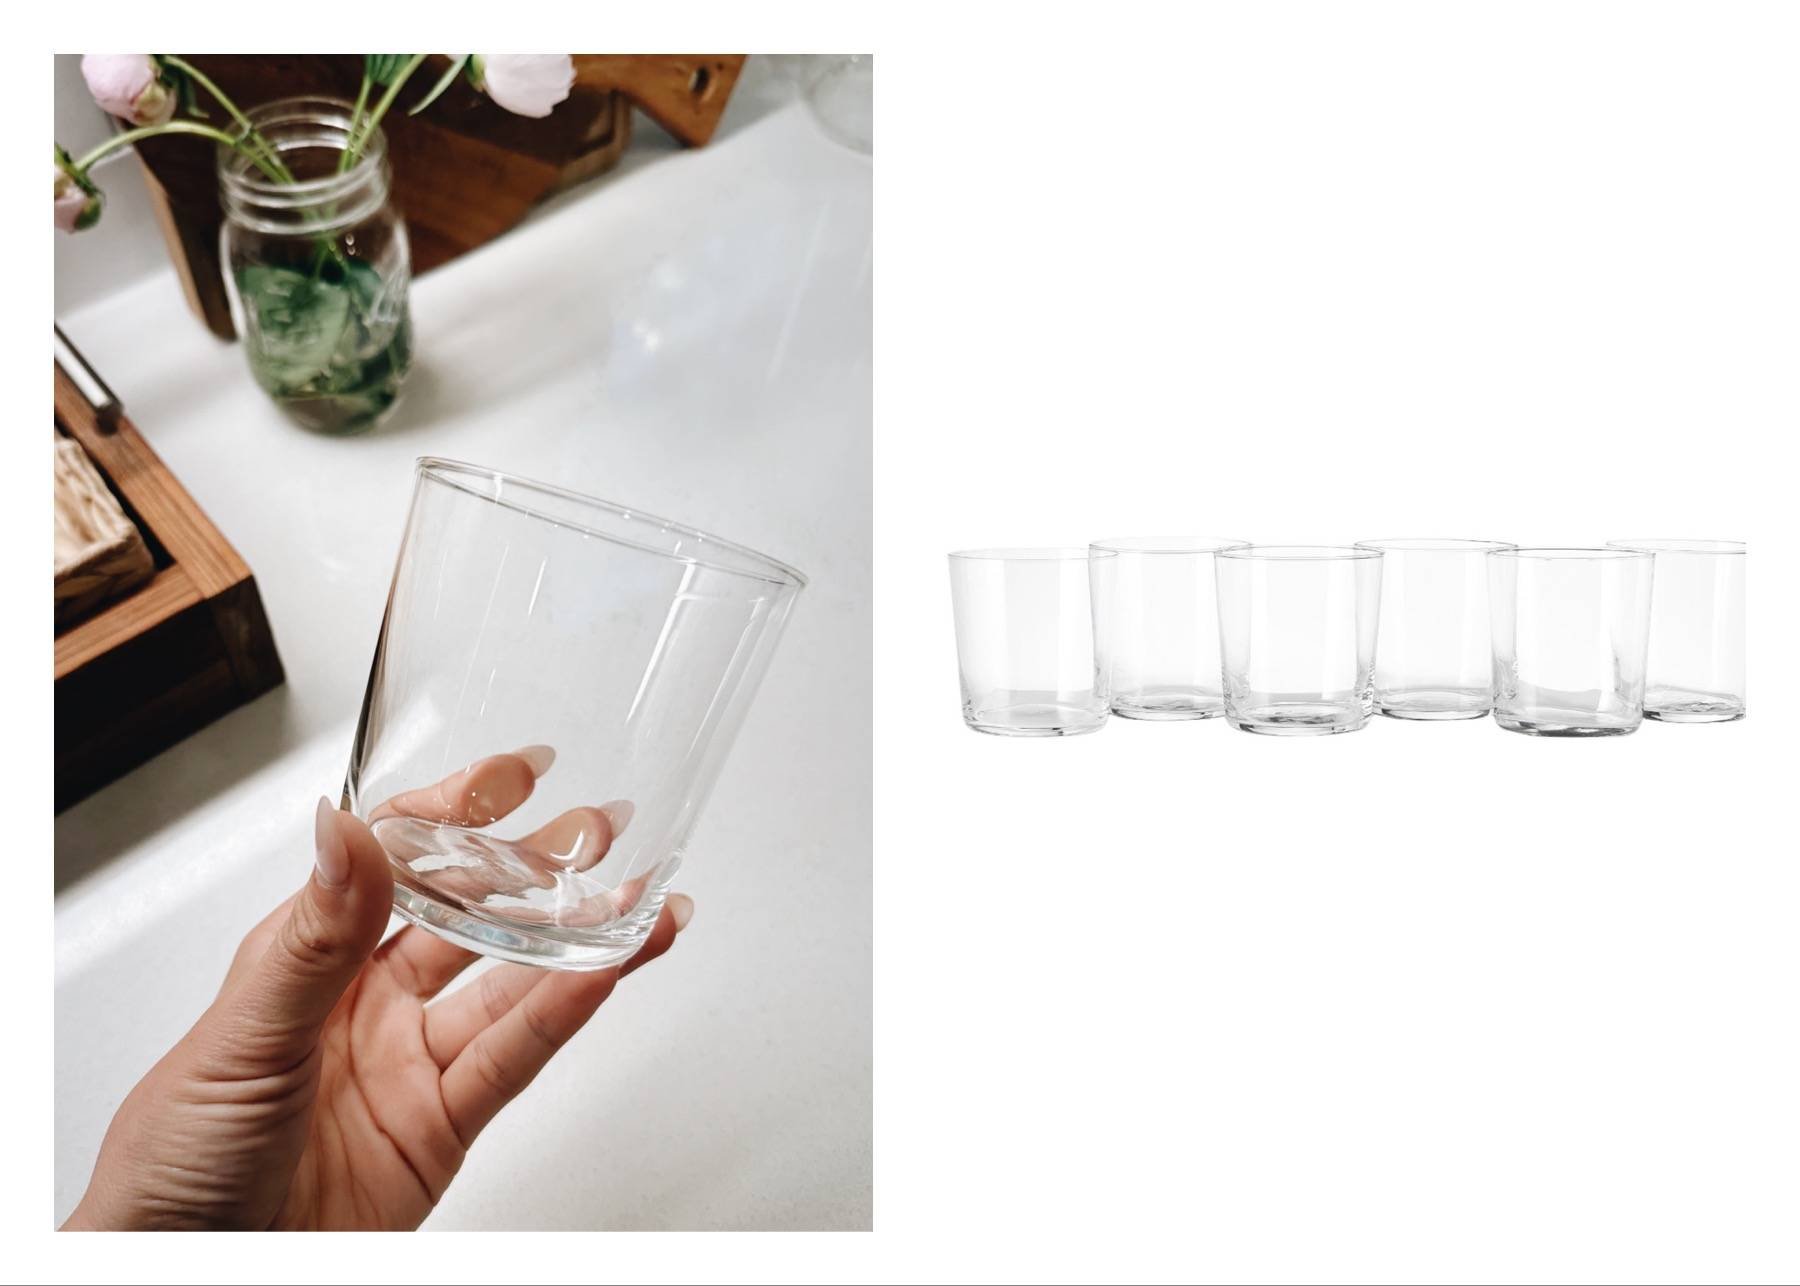 White hand holding a clear drinking glass next to a stock photo of a set of drinking glasses